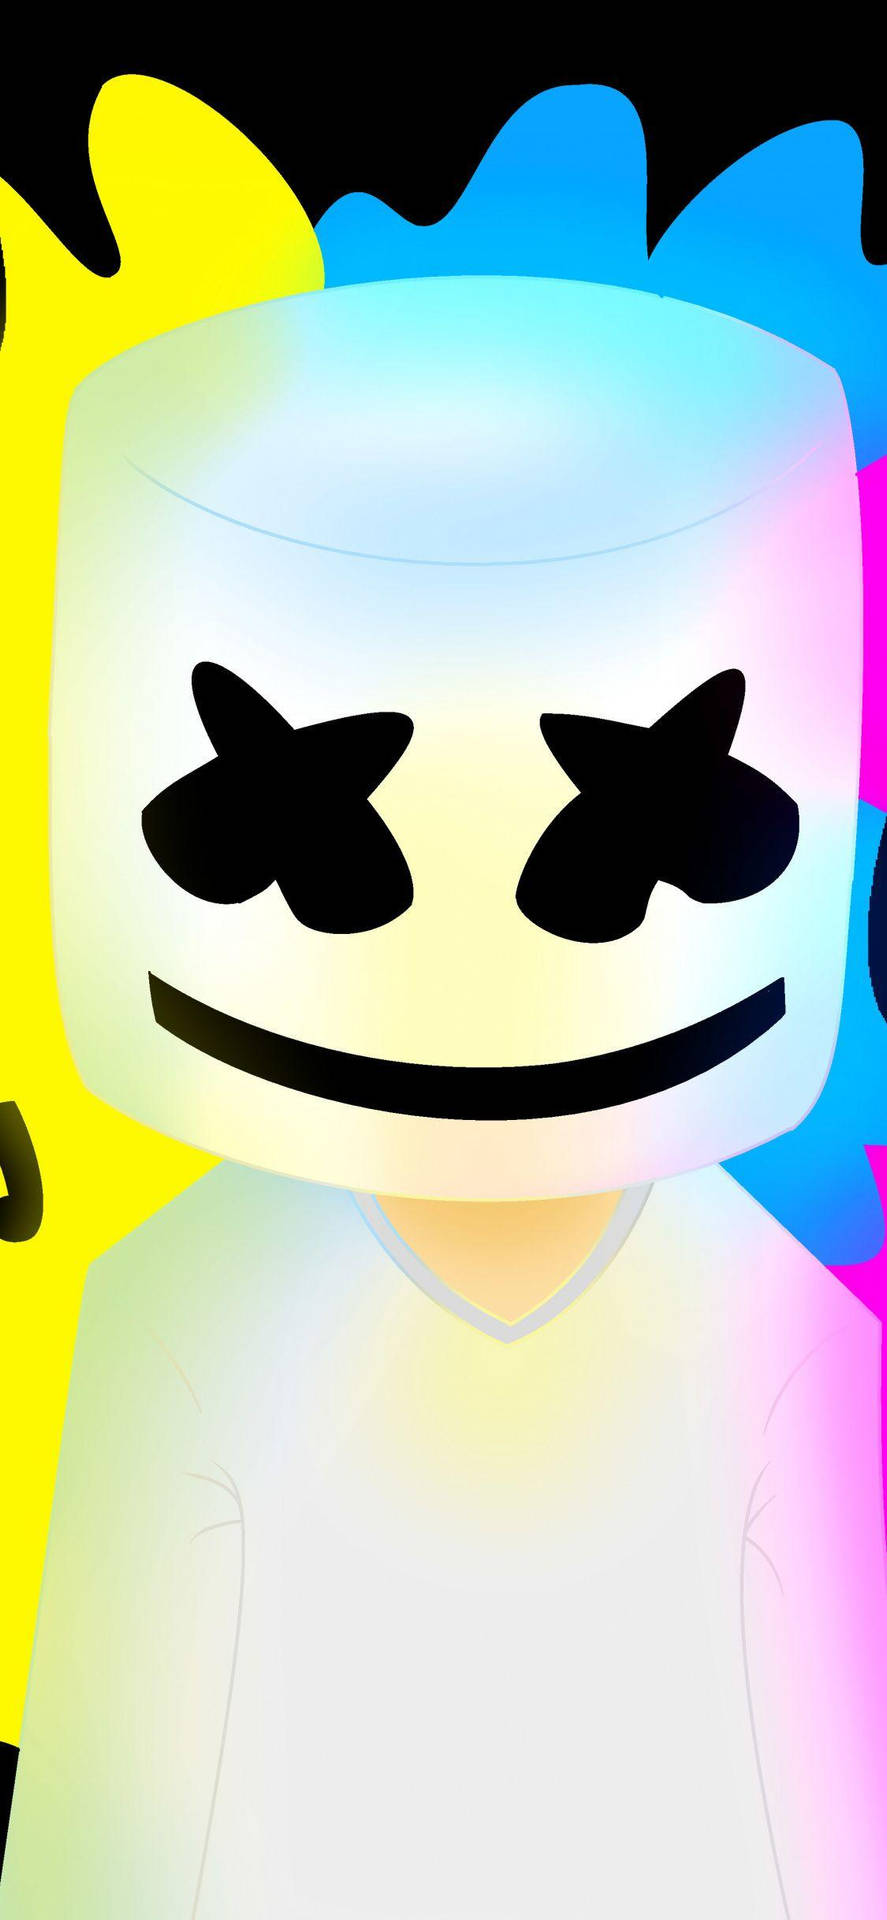 Fun And Colorful Marshmello Iphone Background